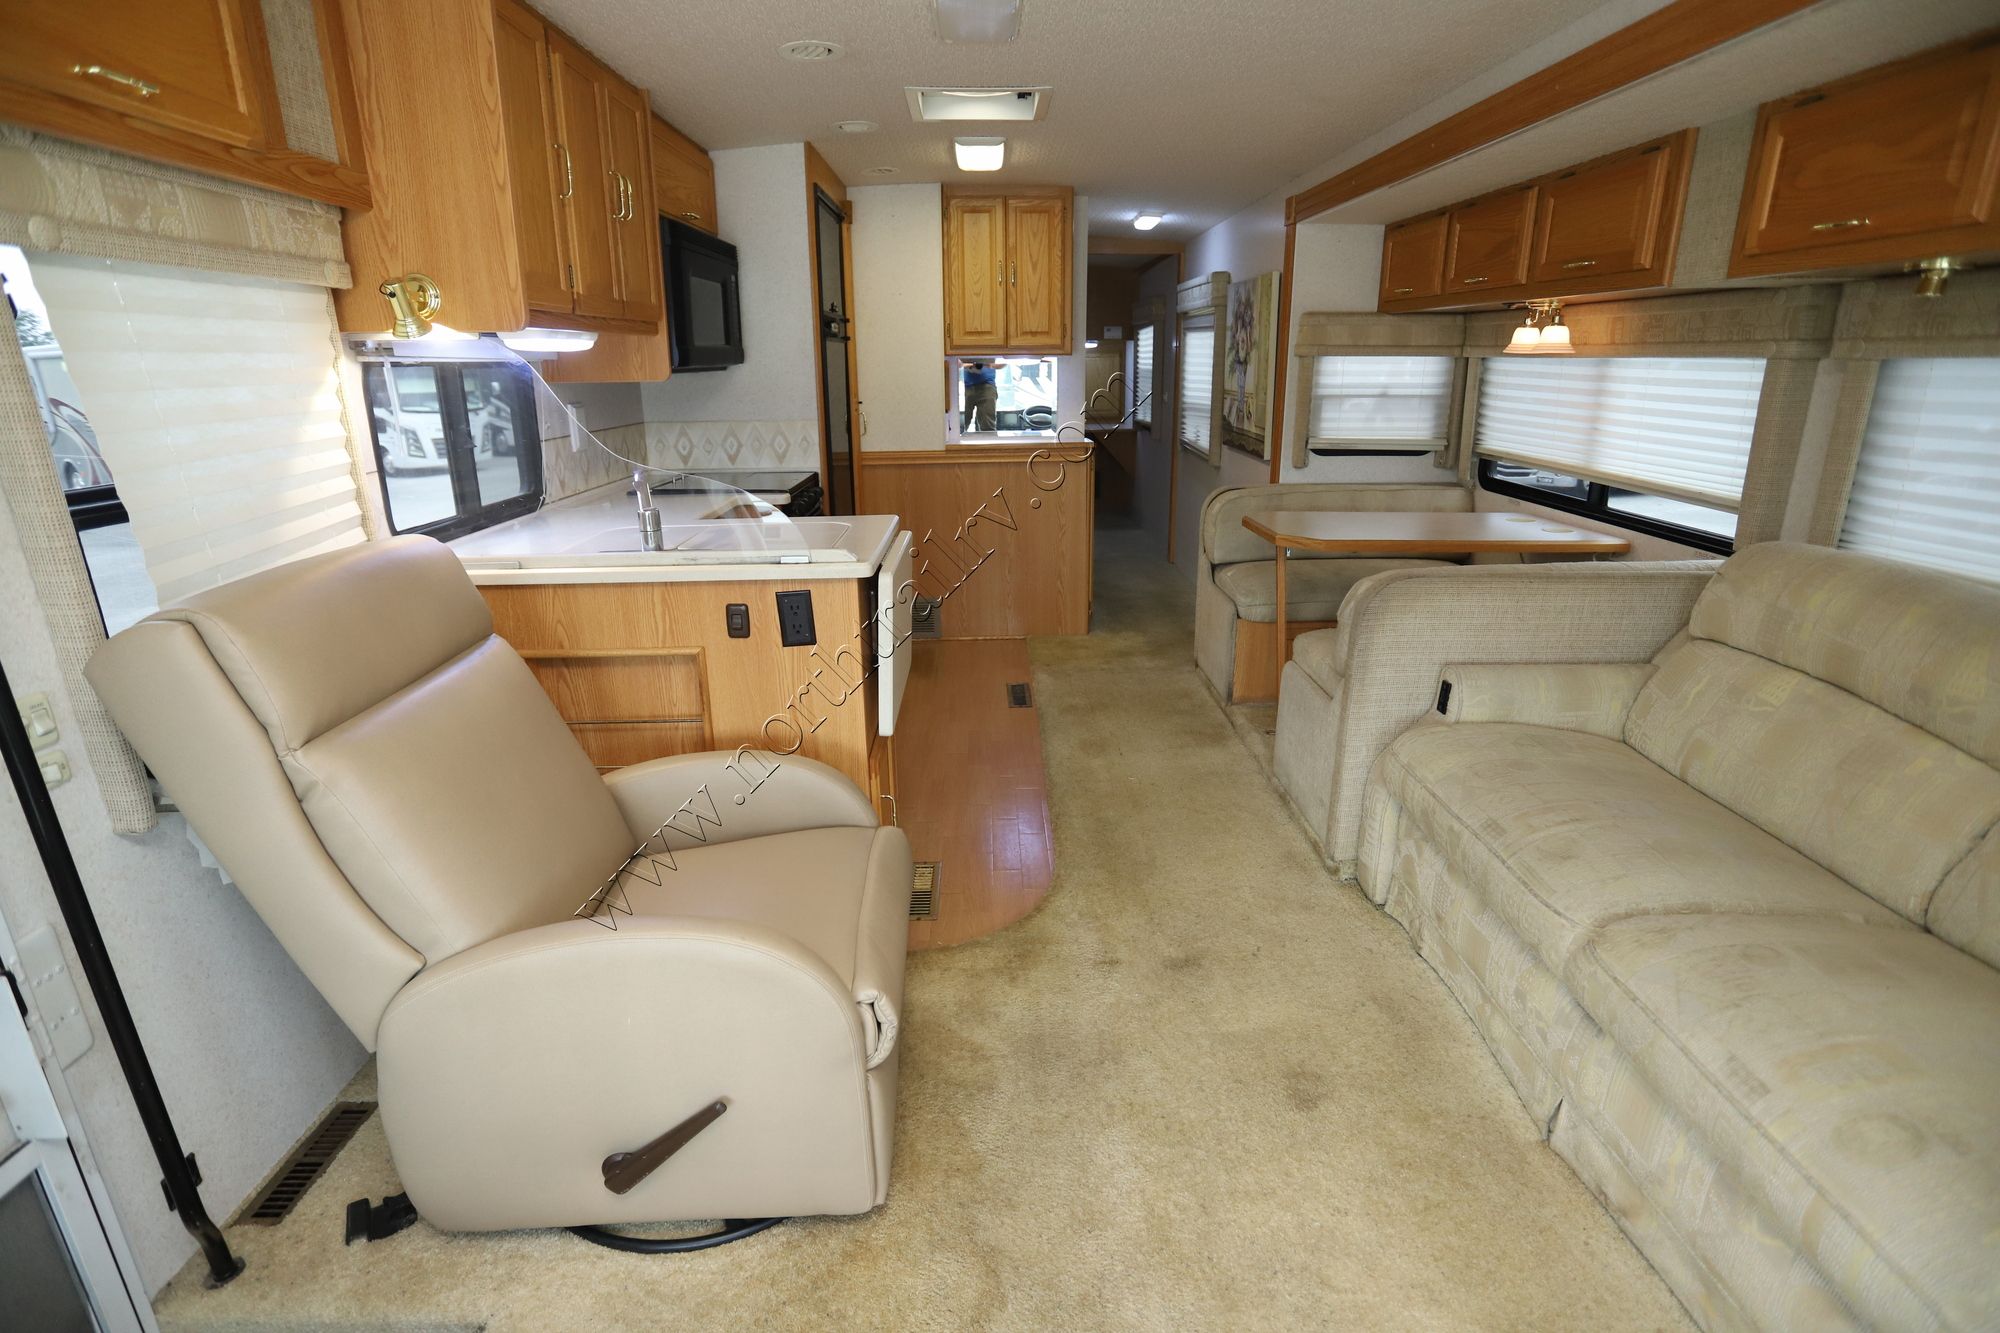 Used 2004 Winnebago Brave 36M Class A  For Sale